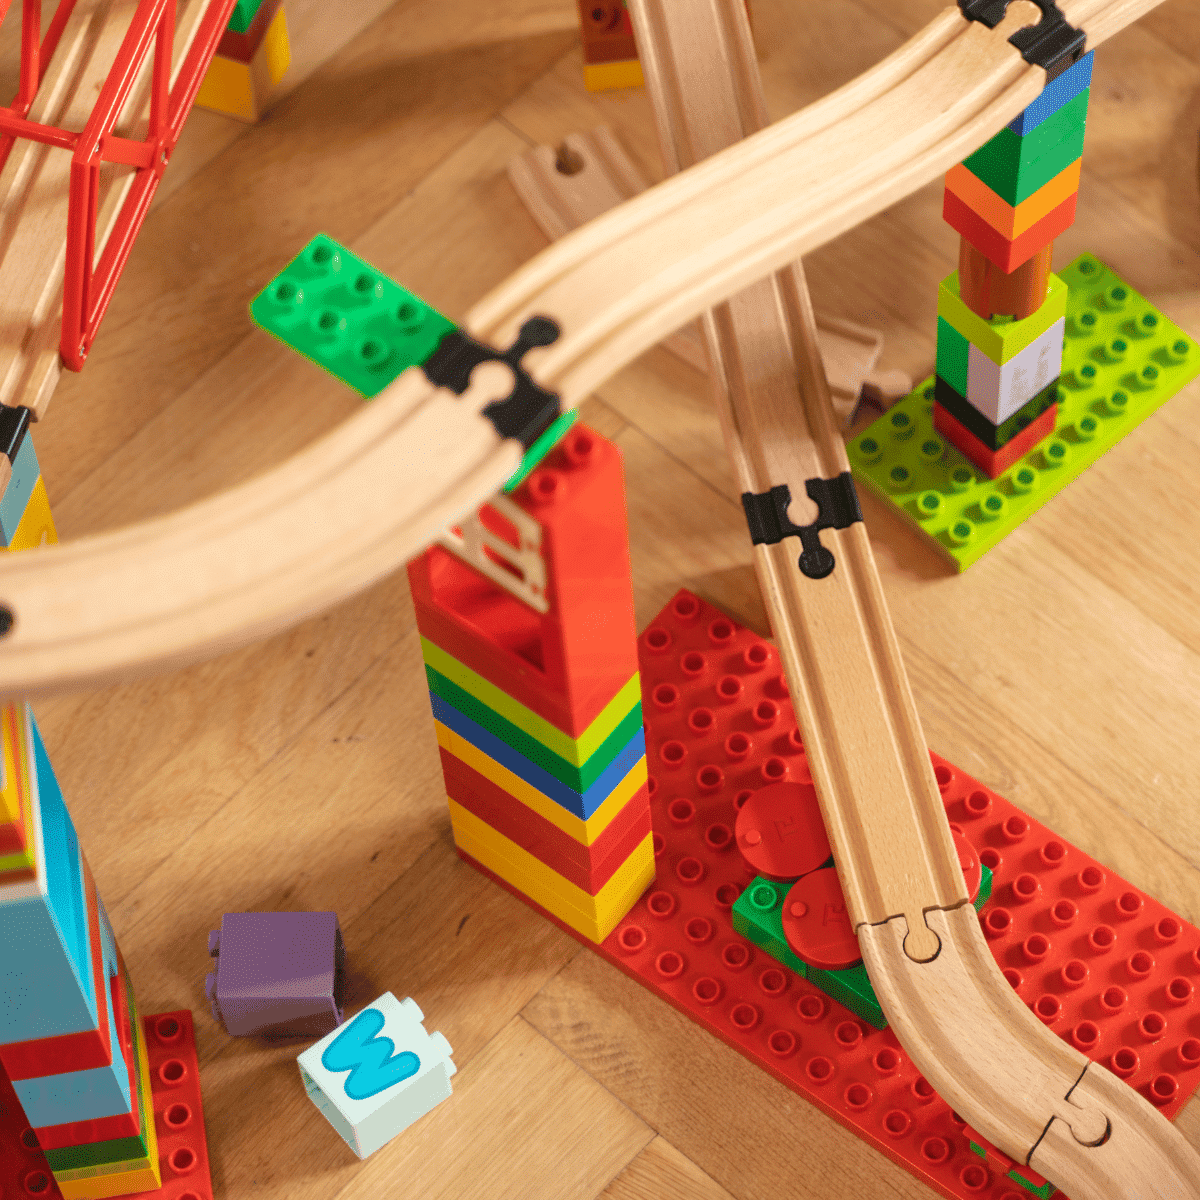 Creative Building Play with DUPLO and Wooden Train Tracks